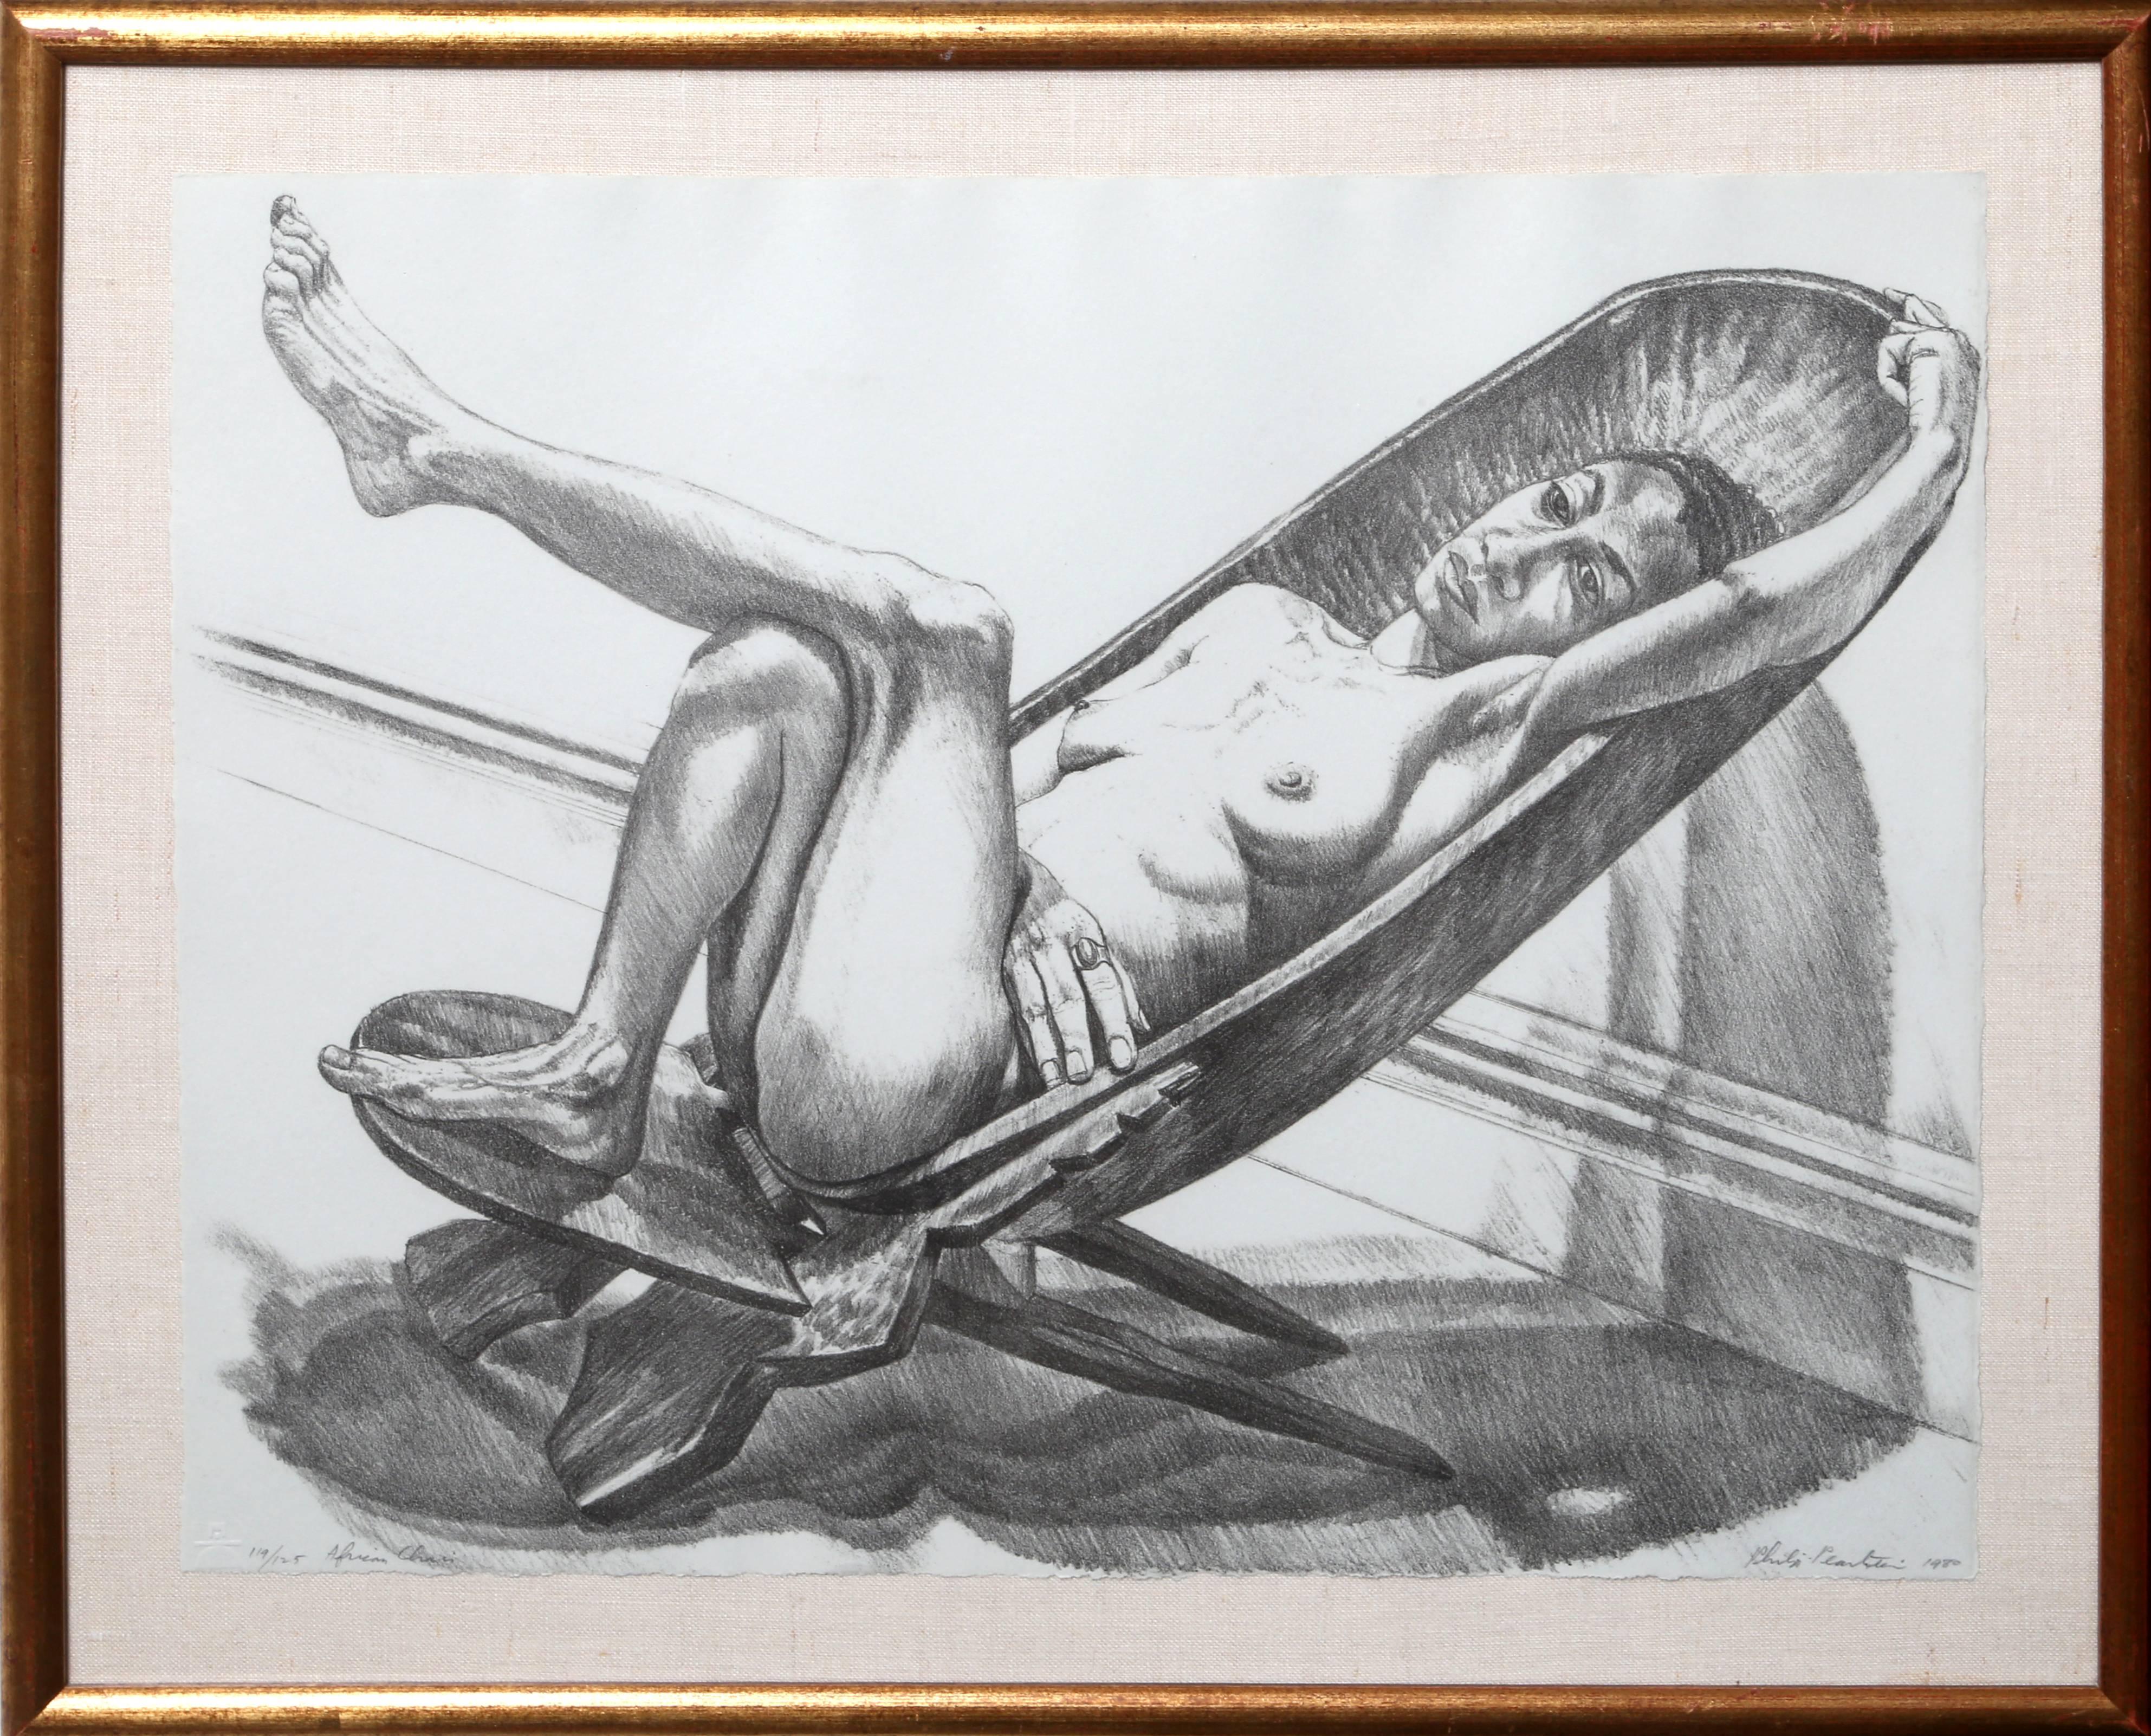 This lithograph was created by American artist Philip Pearlstein. A key figure in the sharp-focus realist movement, he was a leader in the early 1960s of the revival of figure painting in America. He experimented briefly with landscapes and then